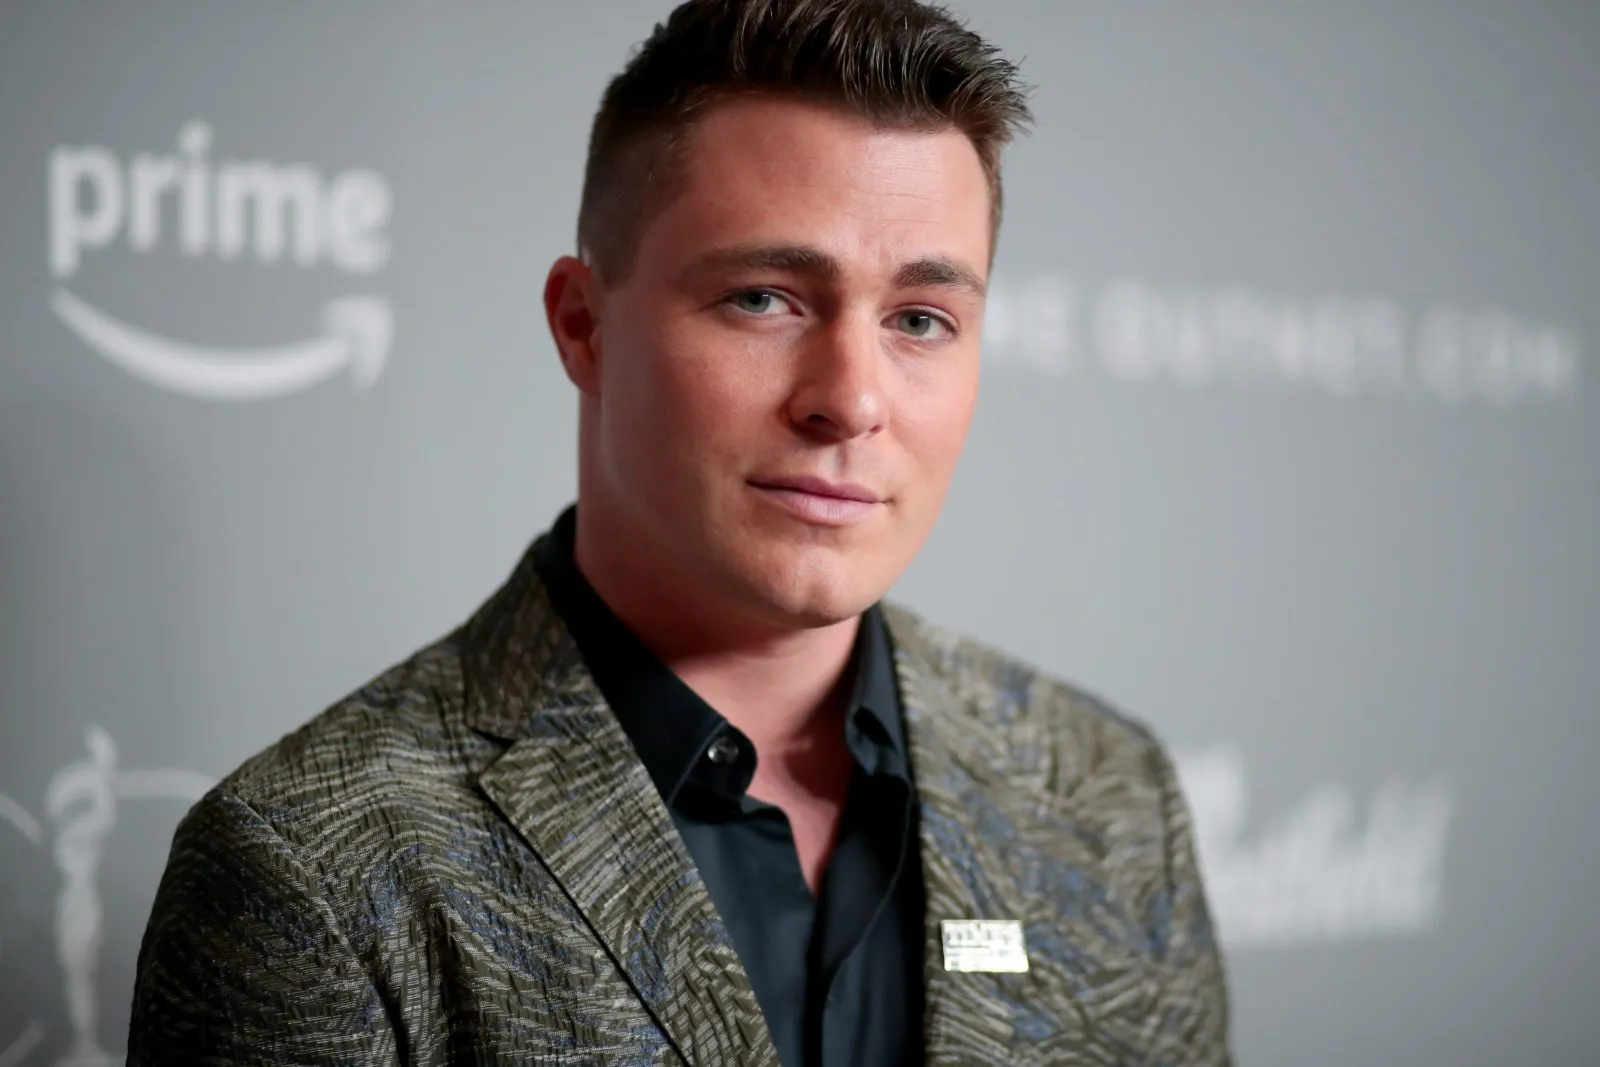 Actor Colton Haynes attends the Costume Designers Guild Awards at The Beverly Hilton Hotel on February 20, 2018 in Beverly Hills, California.